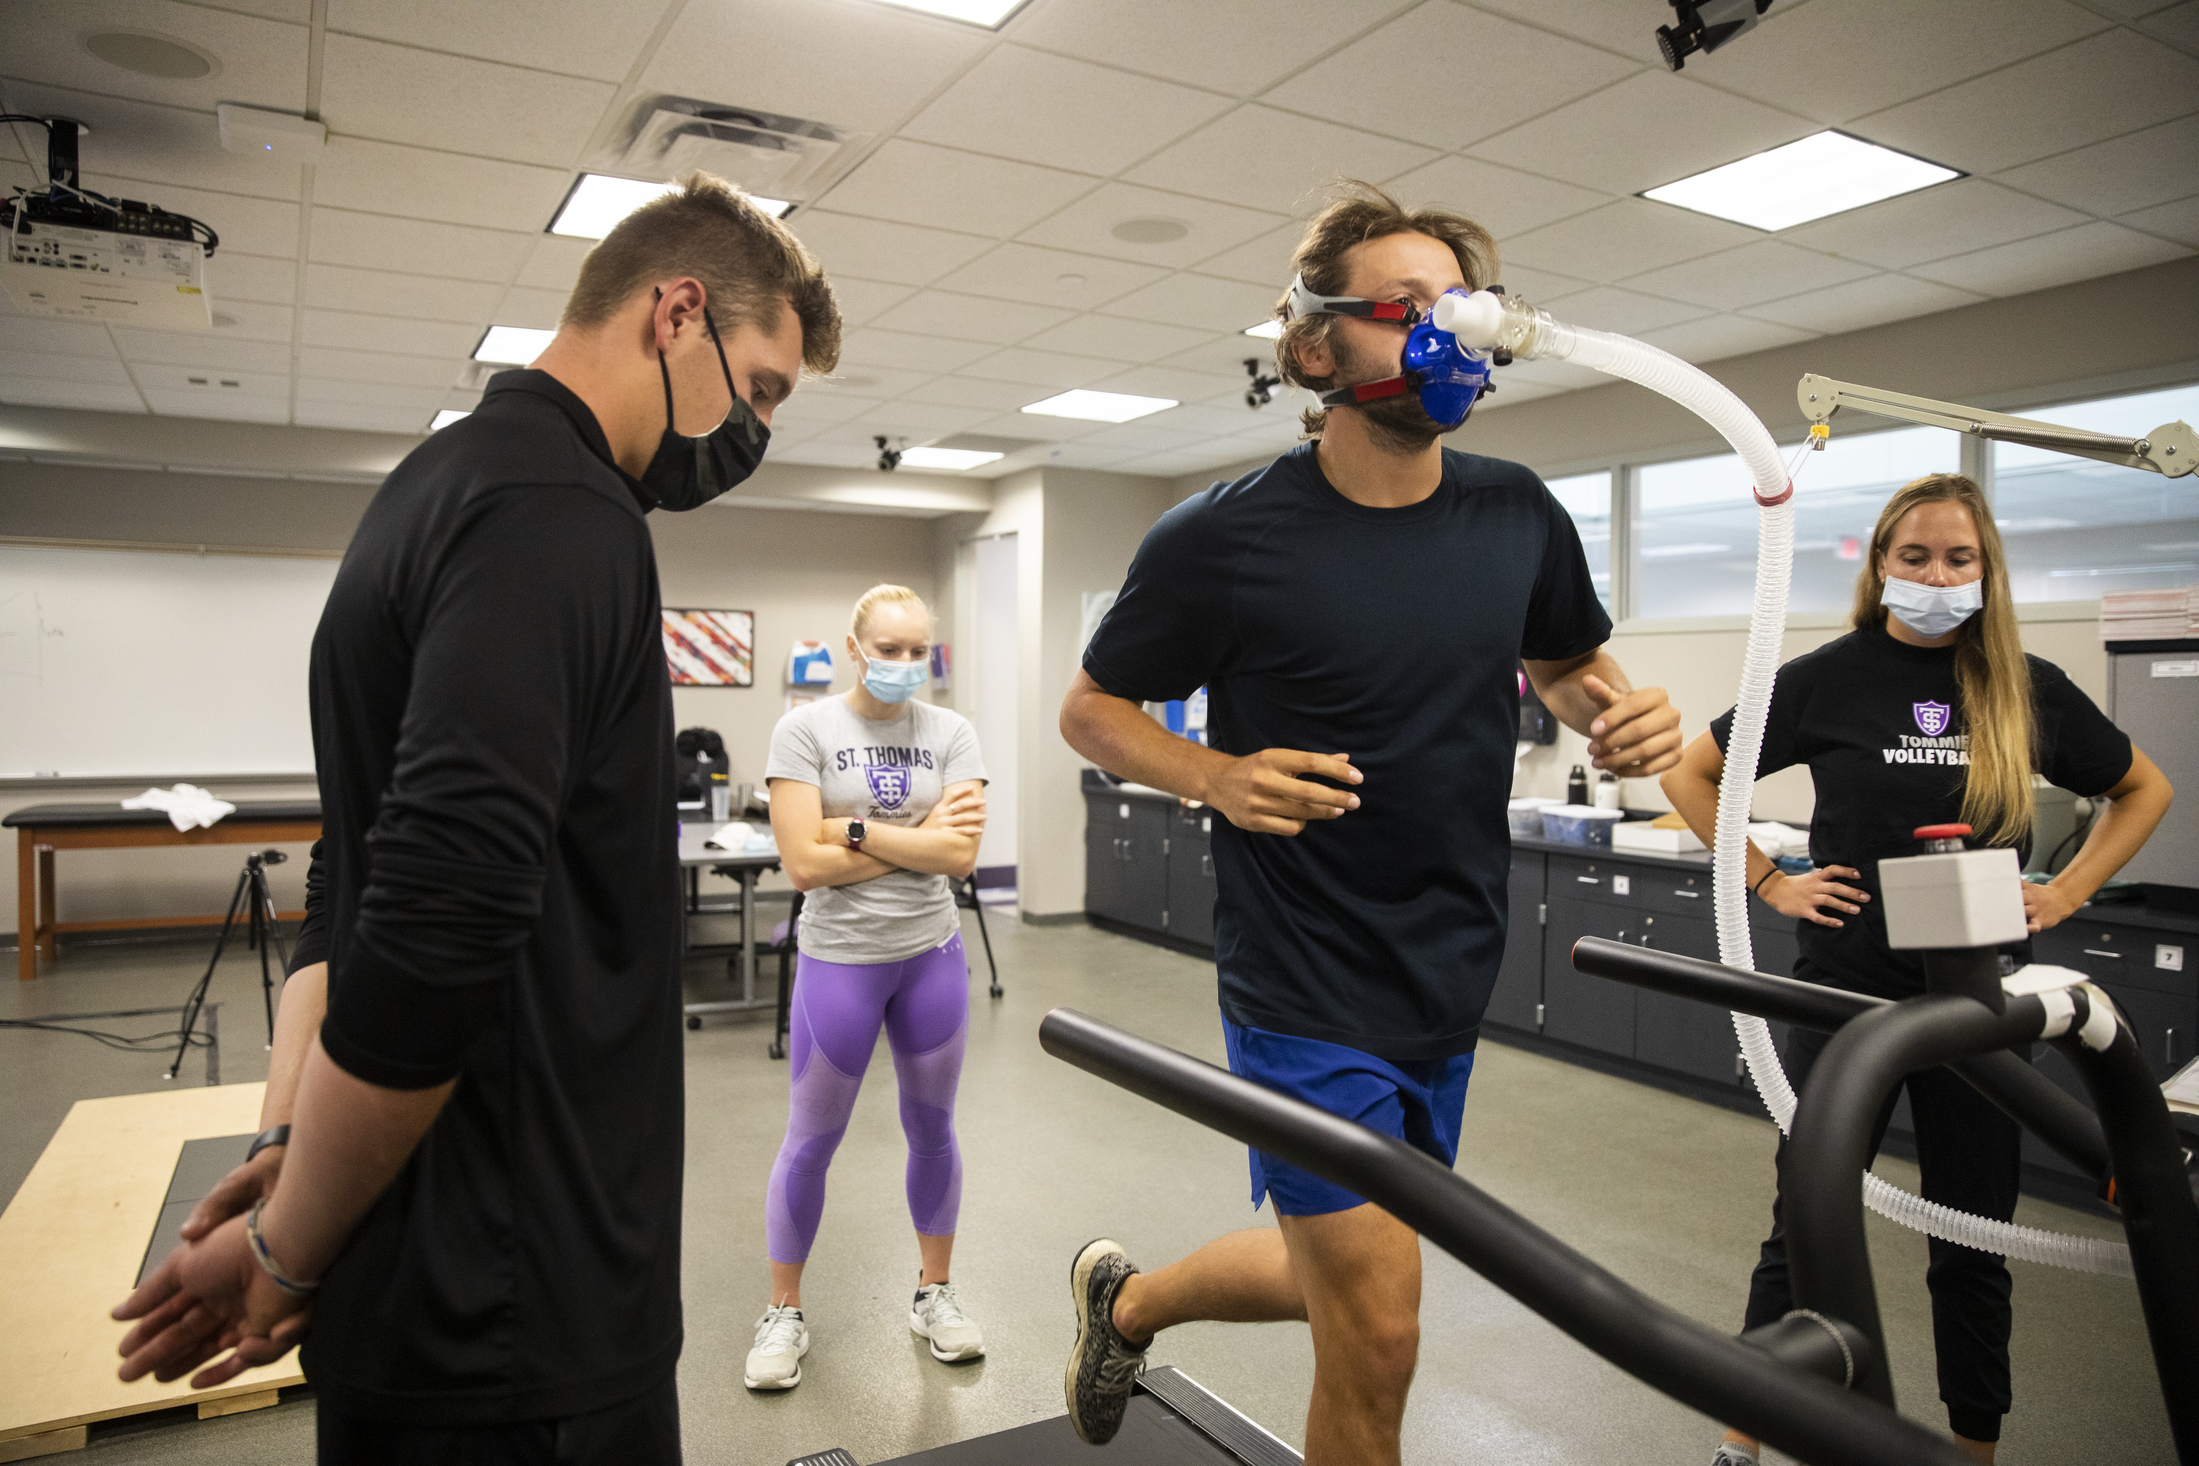 Men’s Hockey Team member Kimball Johnson participates in VO2 max testing, exercising for Health and Exercise Science students in the Anderson Athletic Recreation and Complex on August 31, 2021.